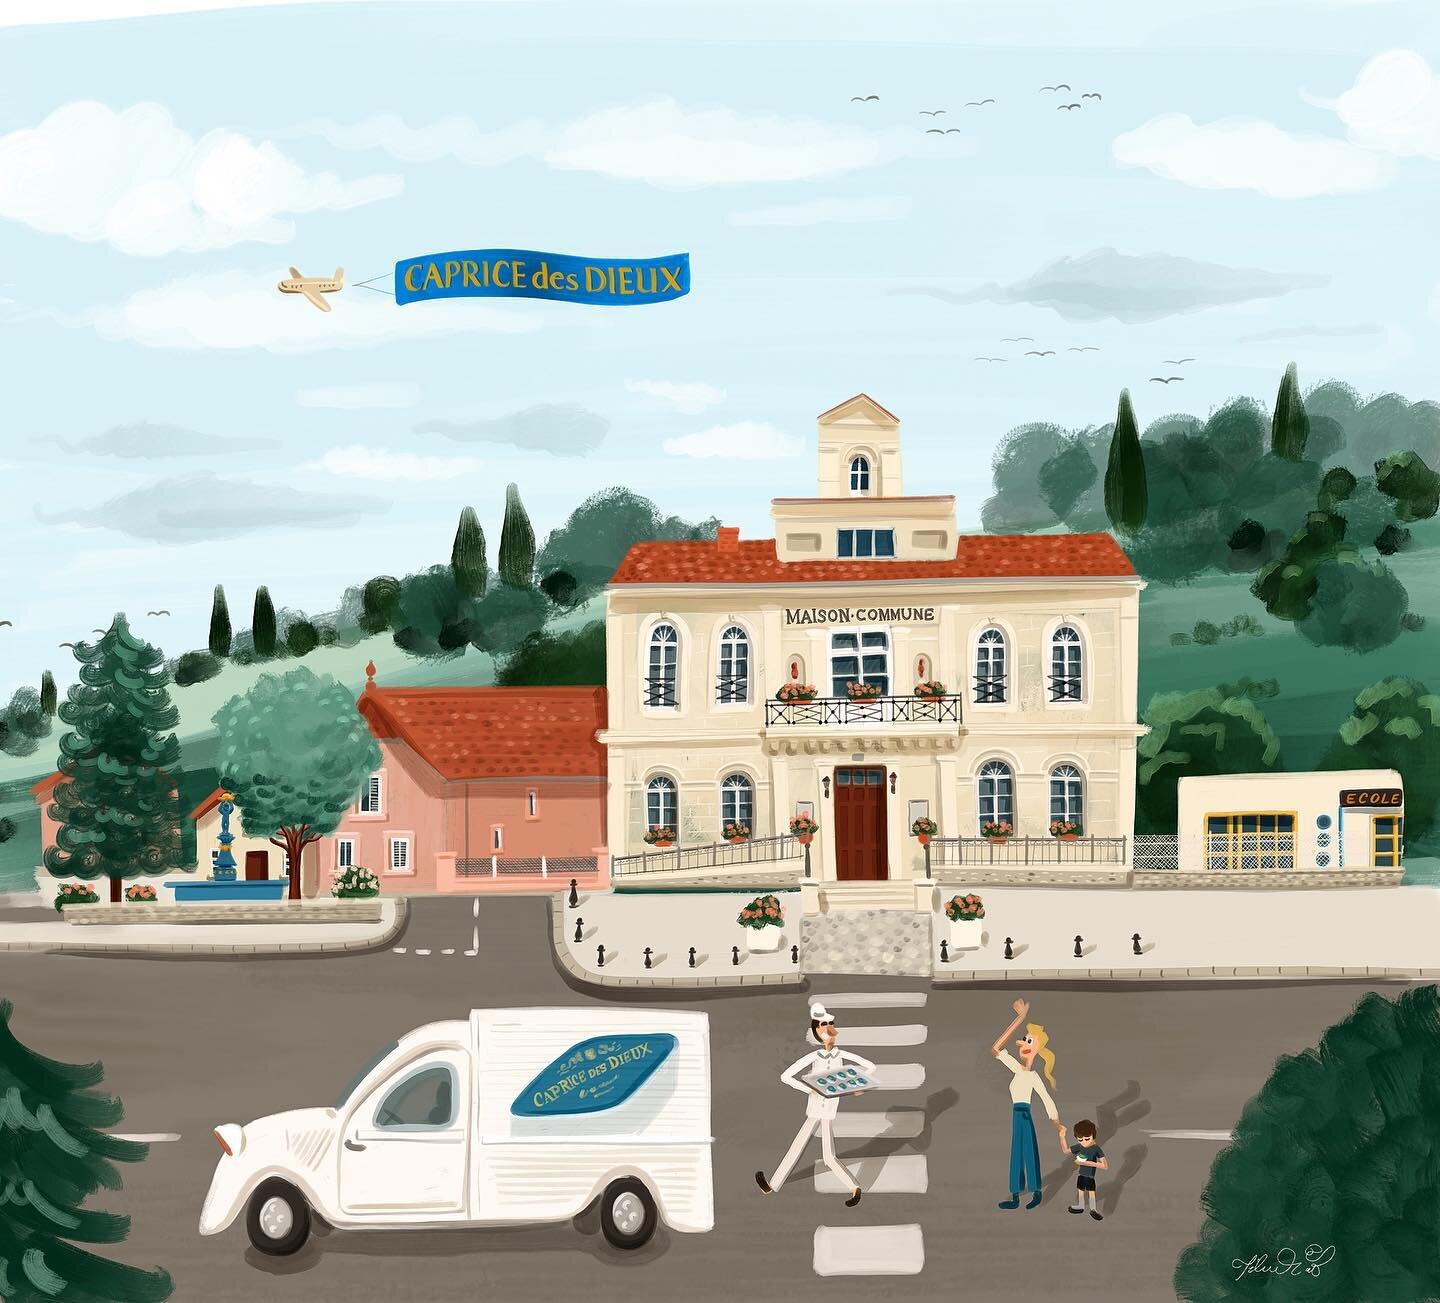 An illustrated view of the main street of Illoud, the French small village in Haute-Marne where soft-ripened cheese brand Caprice des Dieux was first created -and sold- in 1956 by the Bongrain family, before conquering the world. Commissioned by @cap